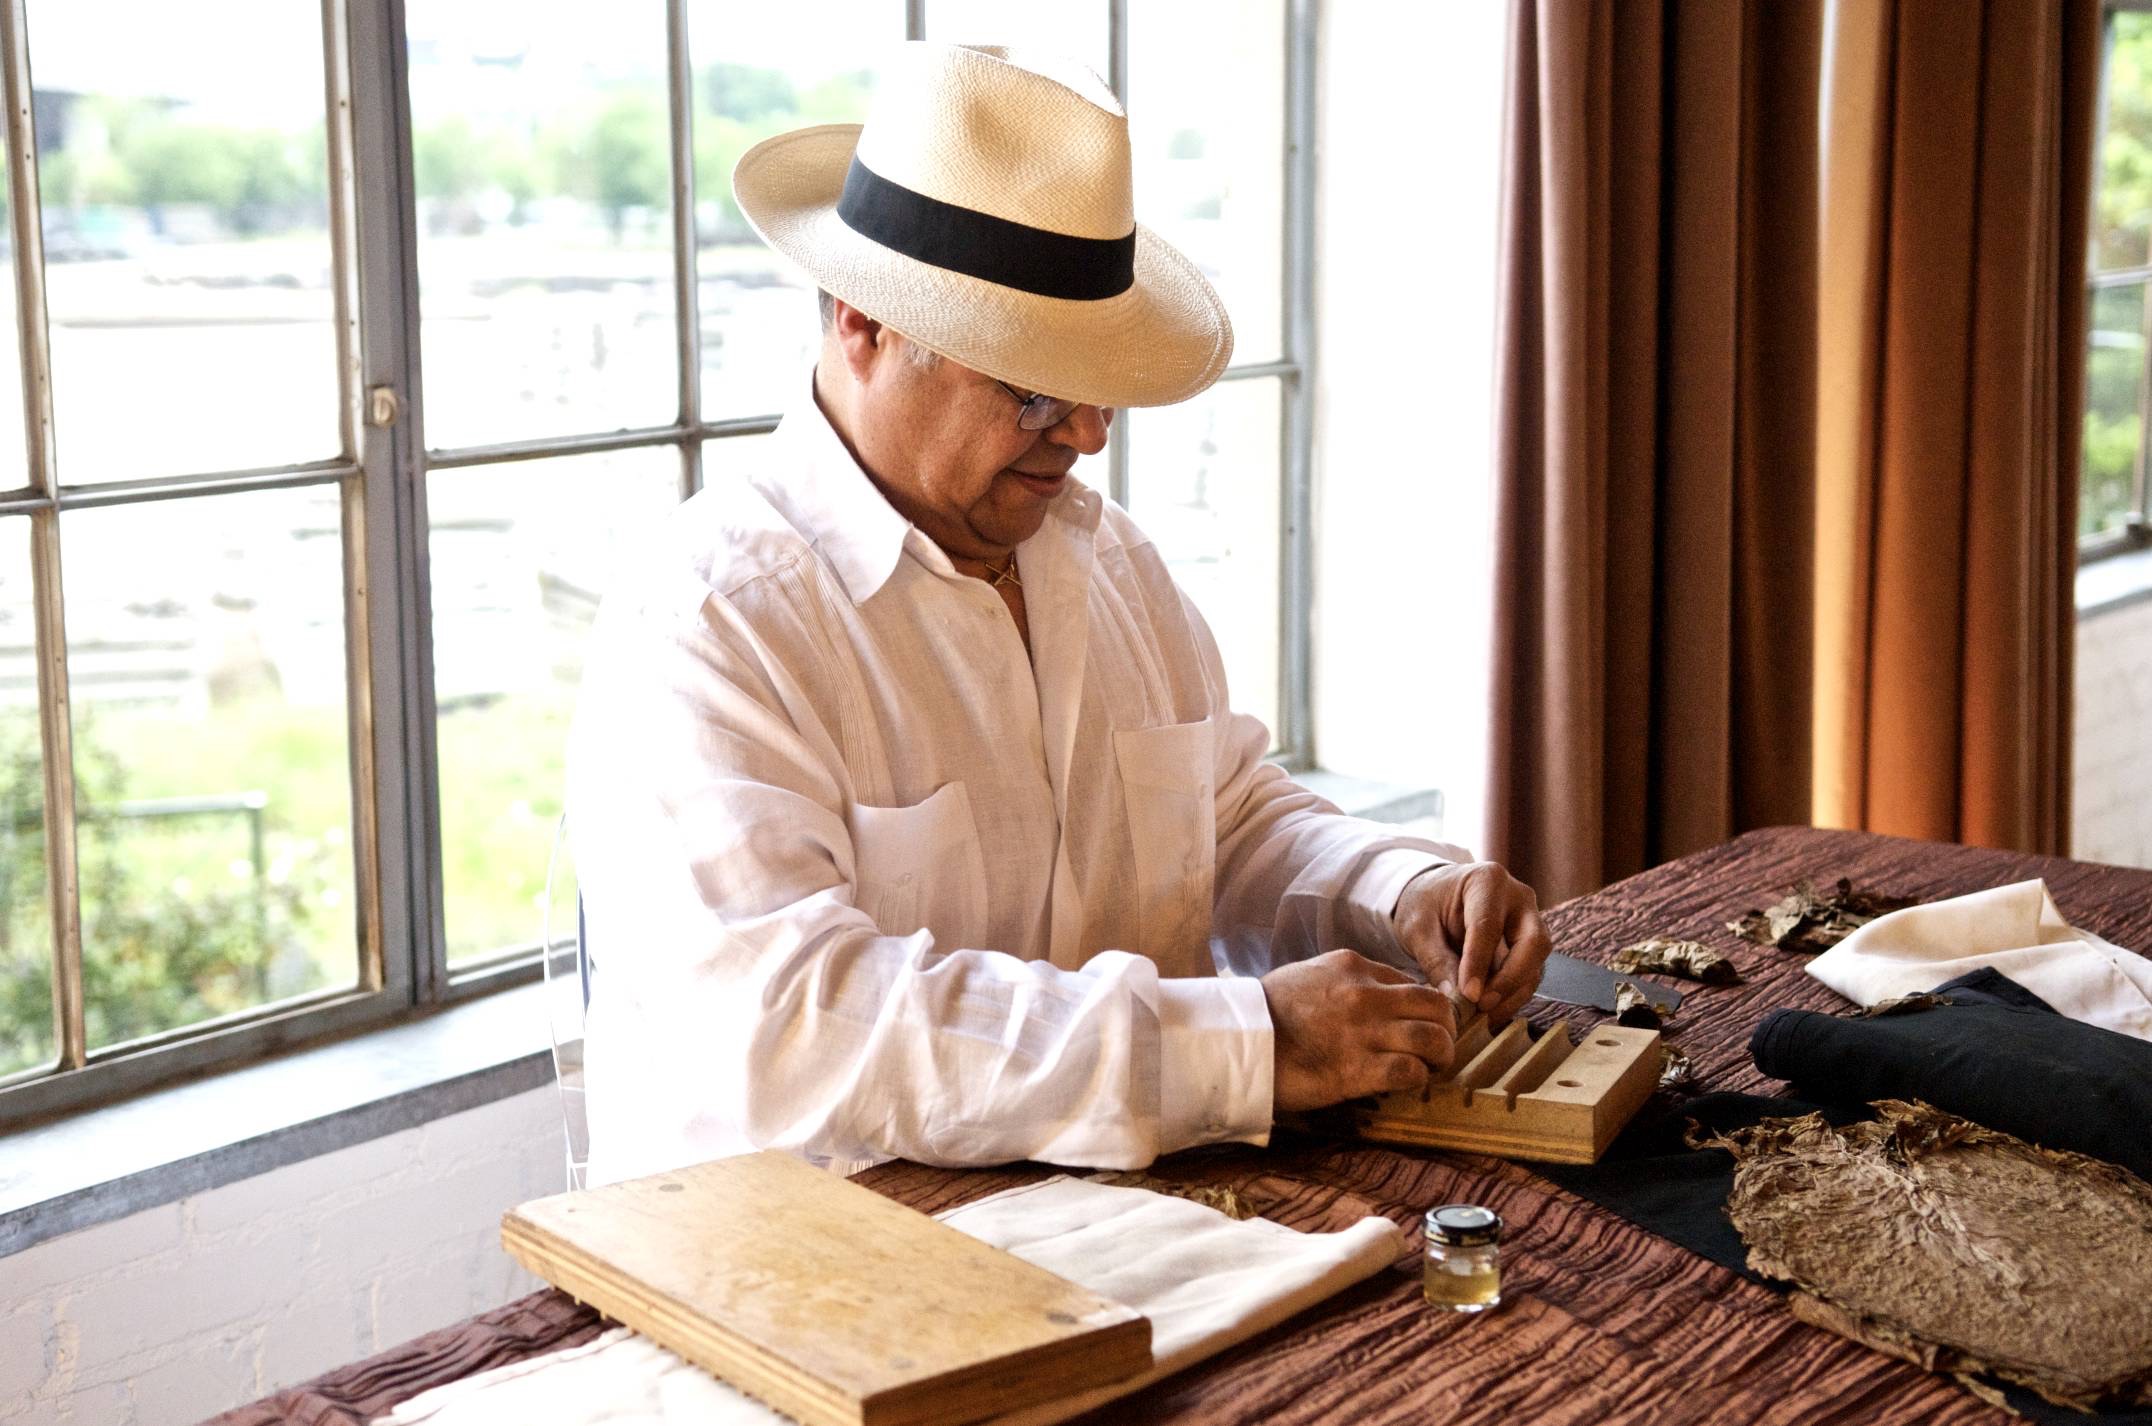 Cuban style hand rolled cigars